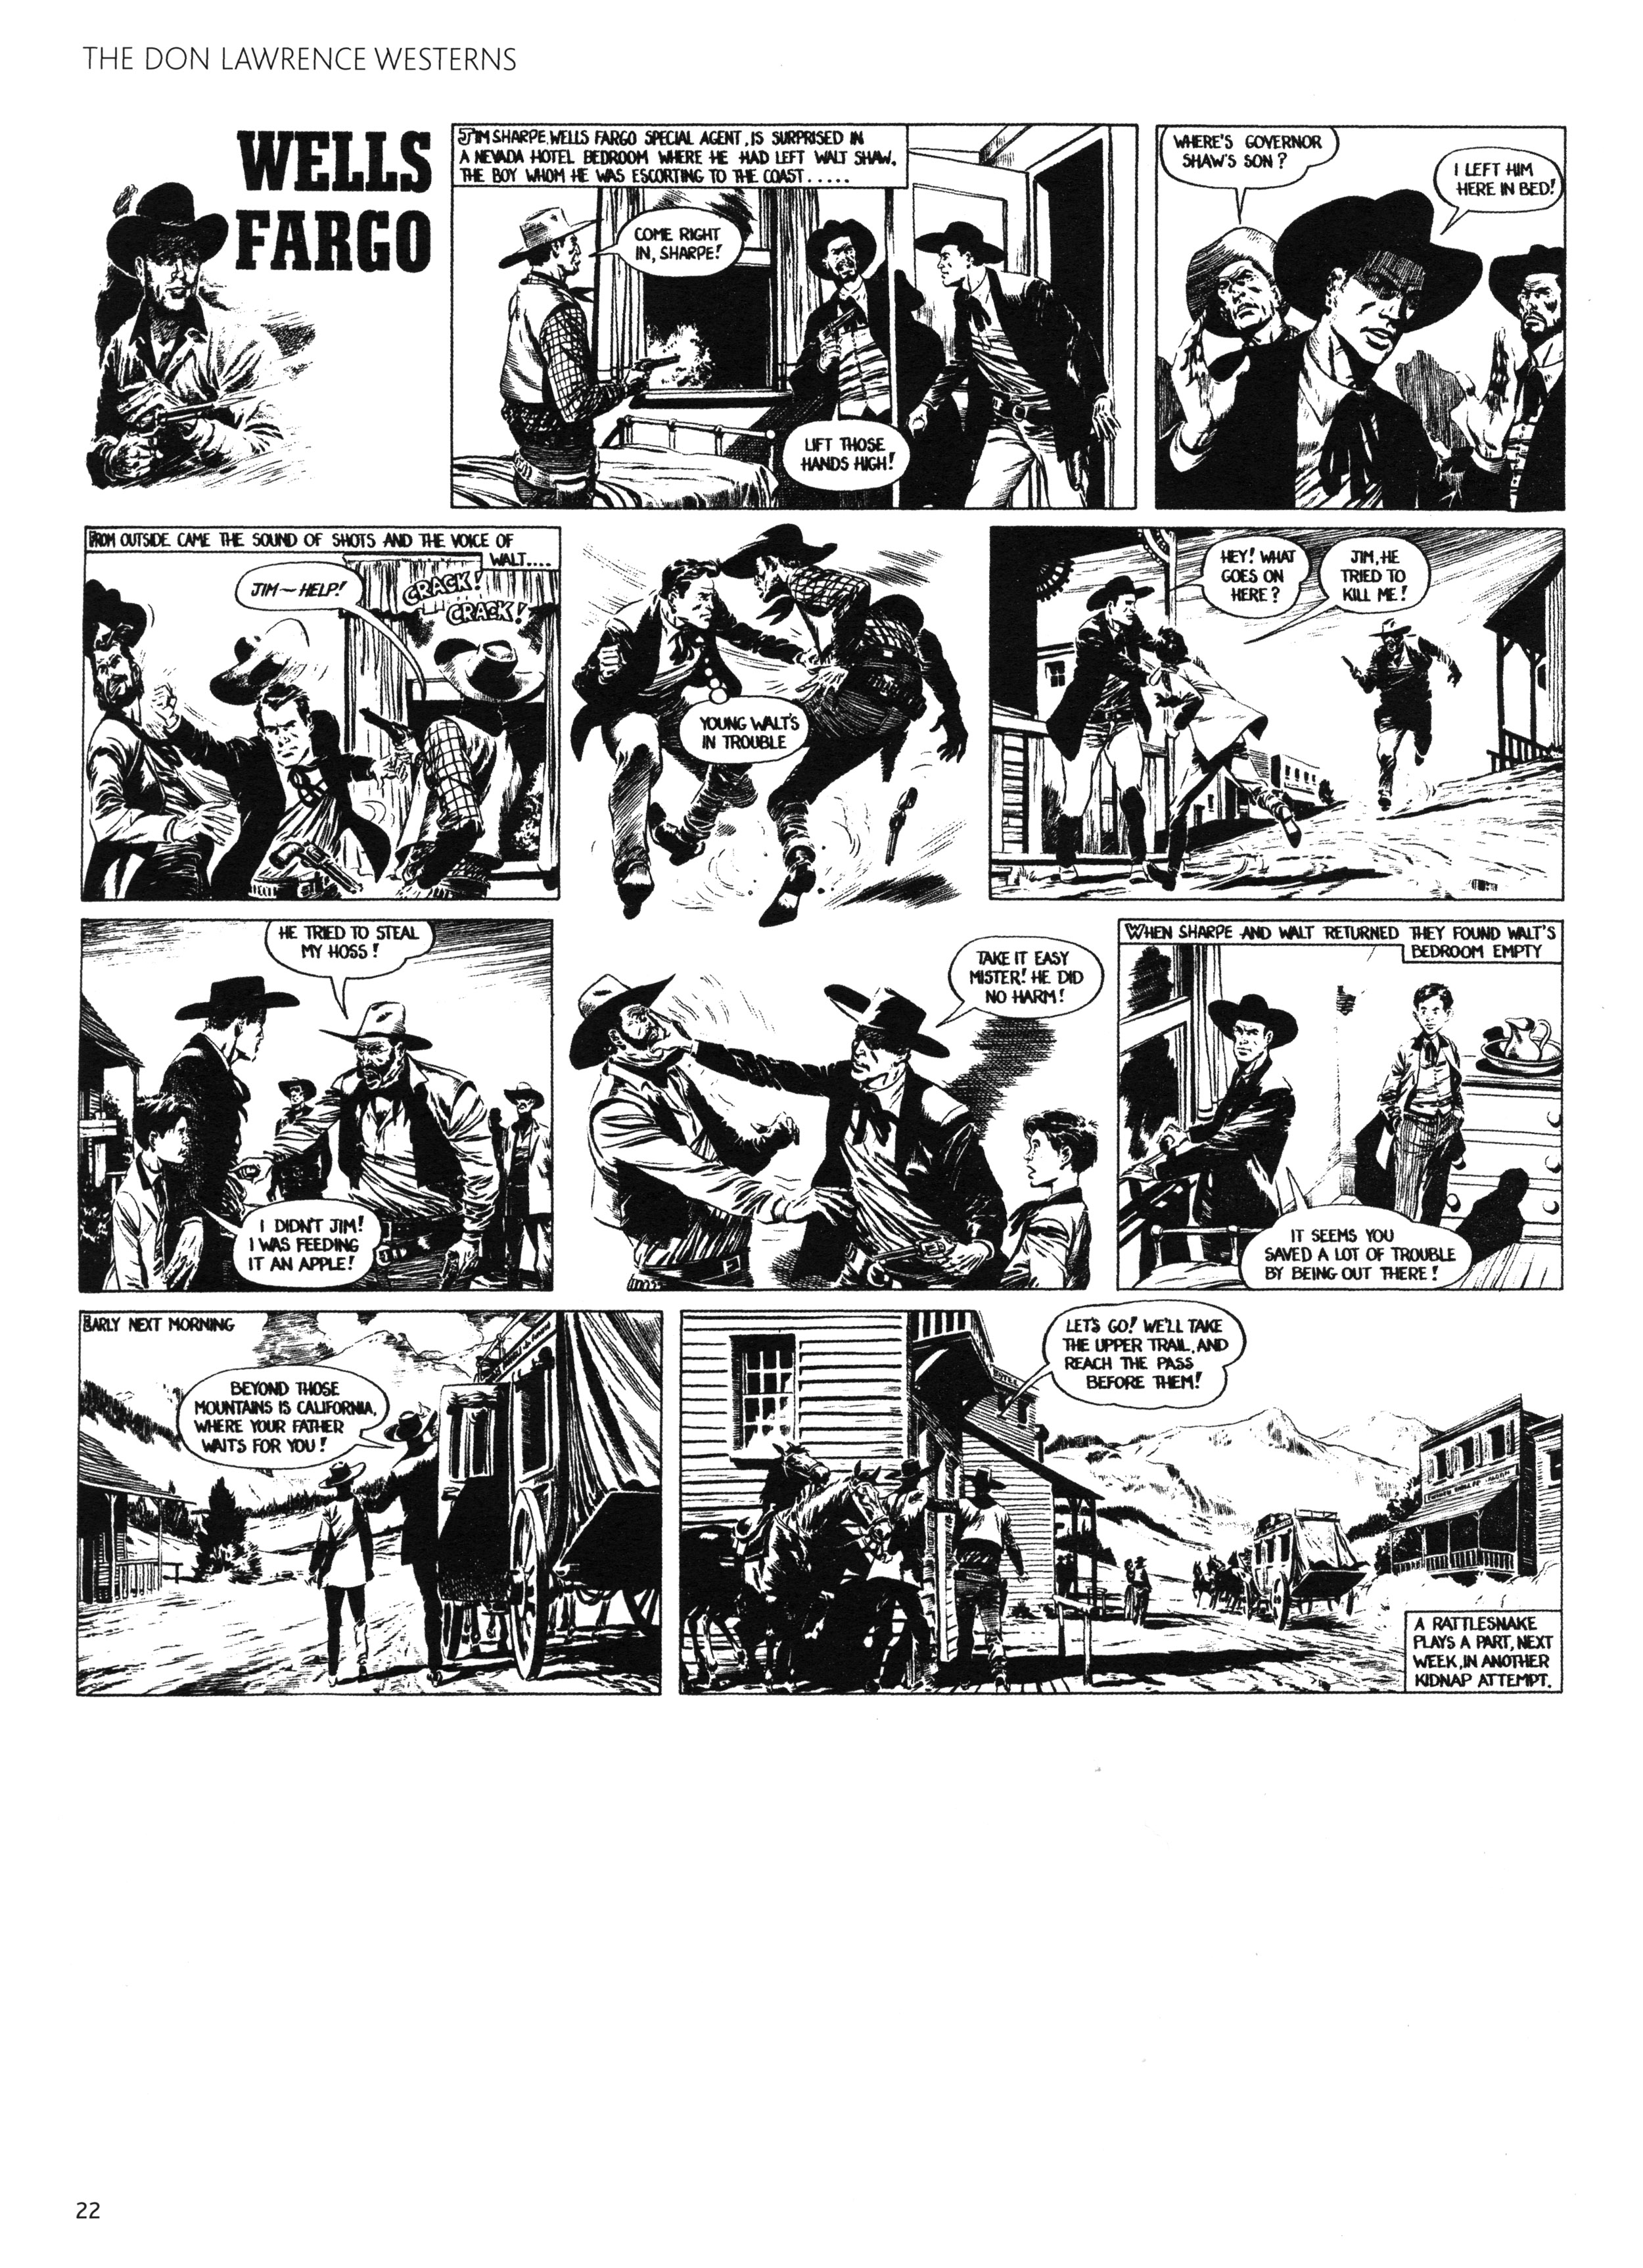 Read online Don Lawrence Westerns comic -  Issue # TPB (Part 1) - 26